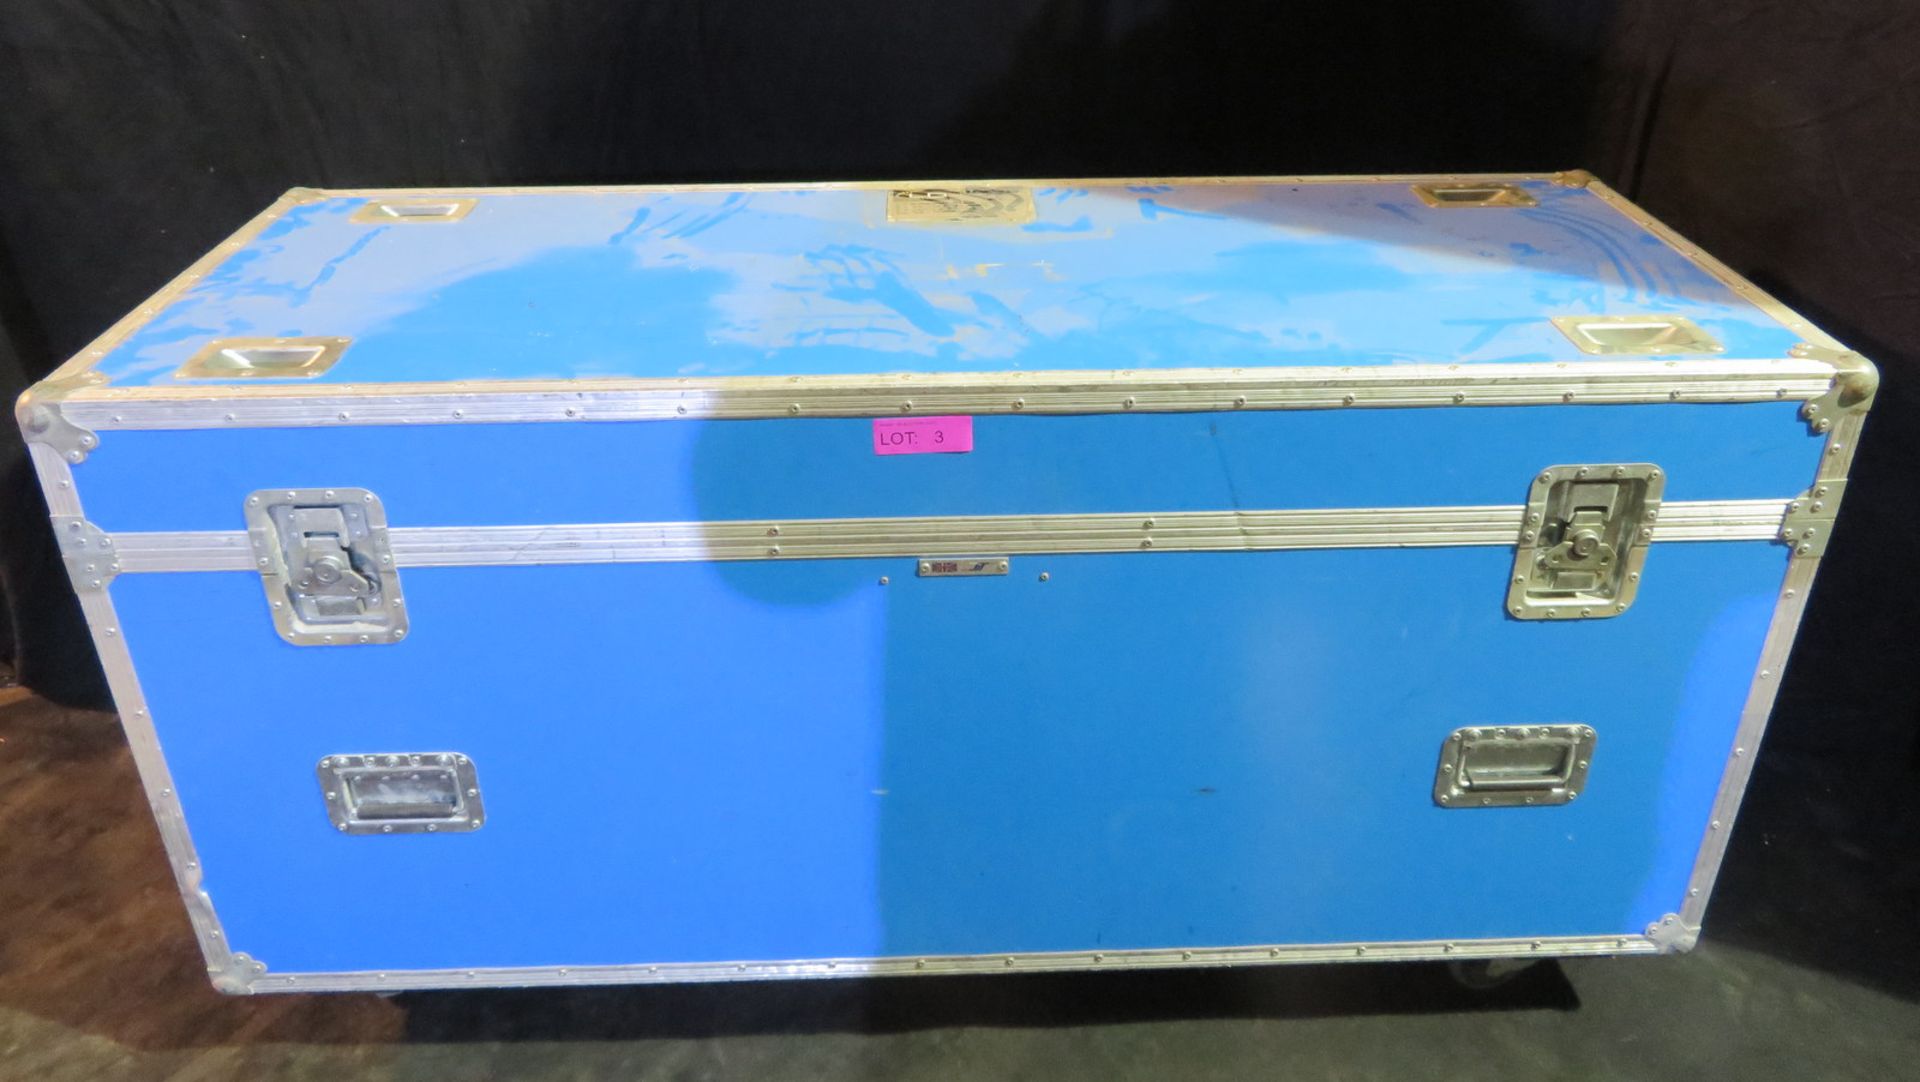 Pair of Clay Paky Alpha Spot HPE 1500 in twin flightcase - Image 12 of 12